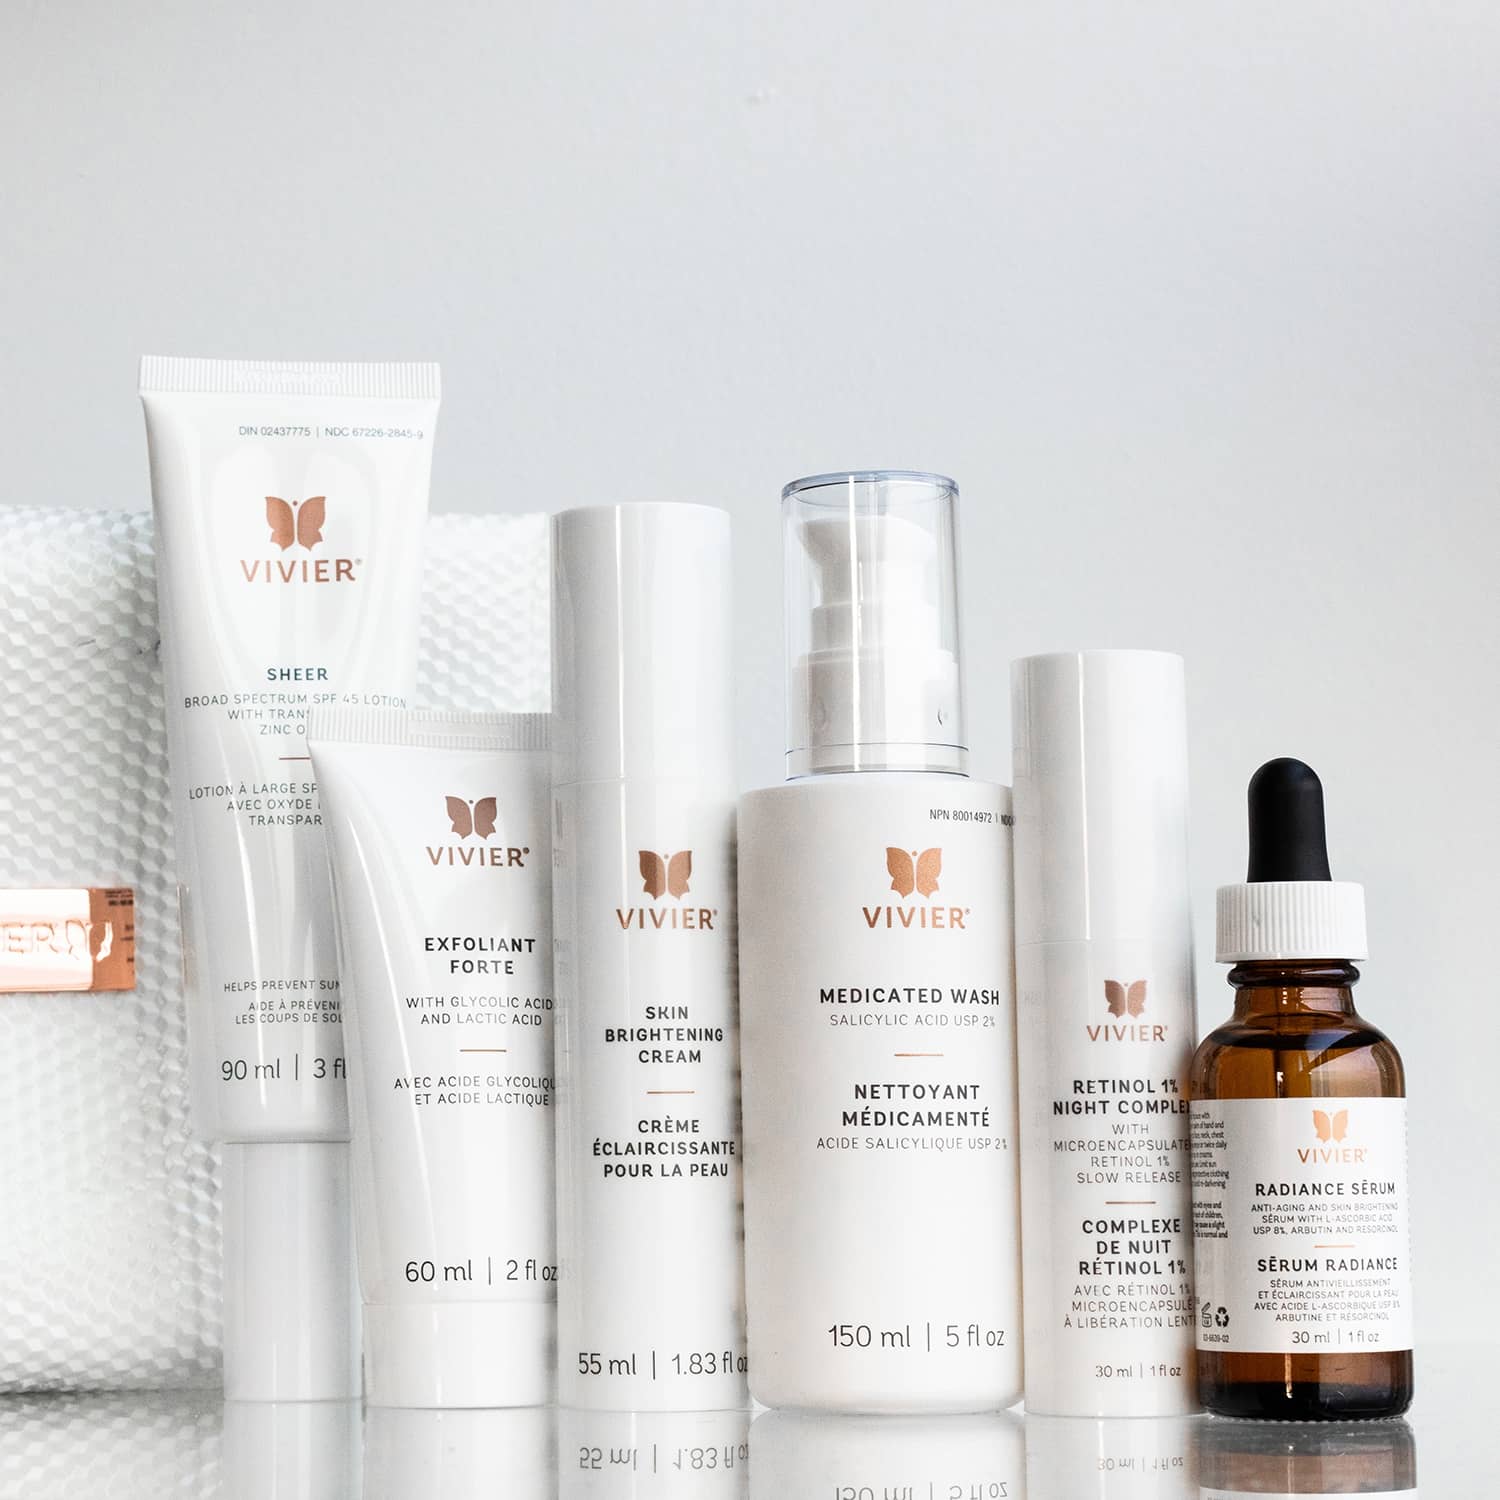 vivier-skincare-south-surrey-glow-dr-iso